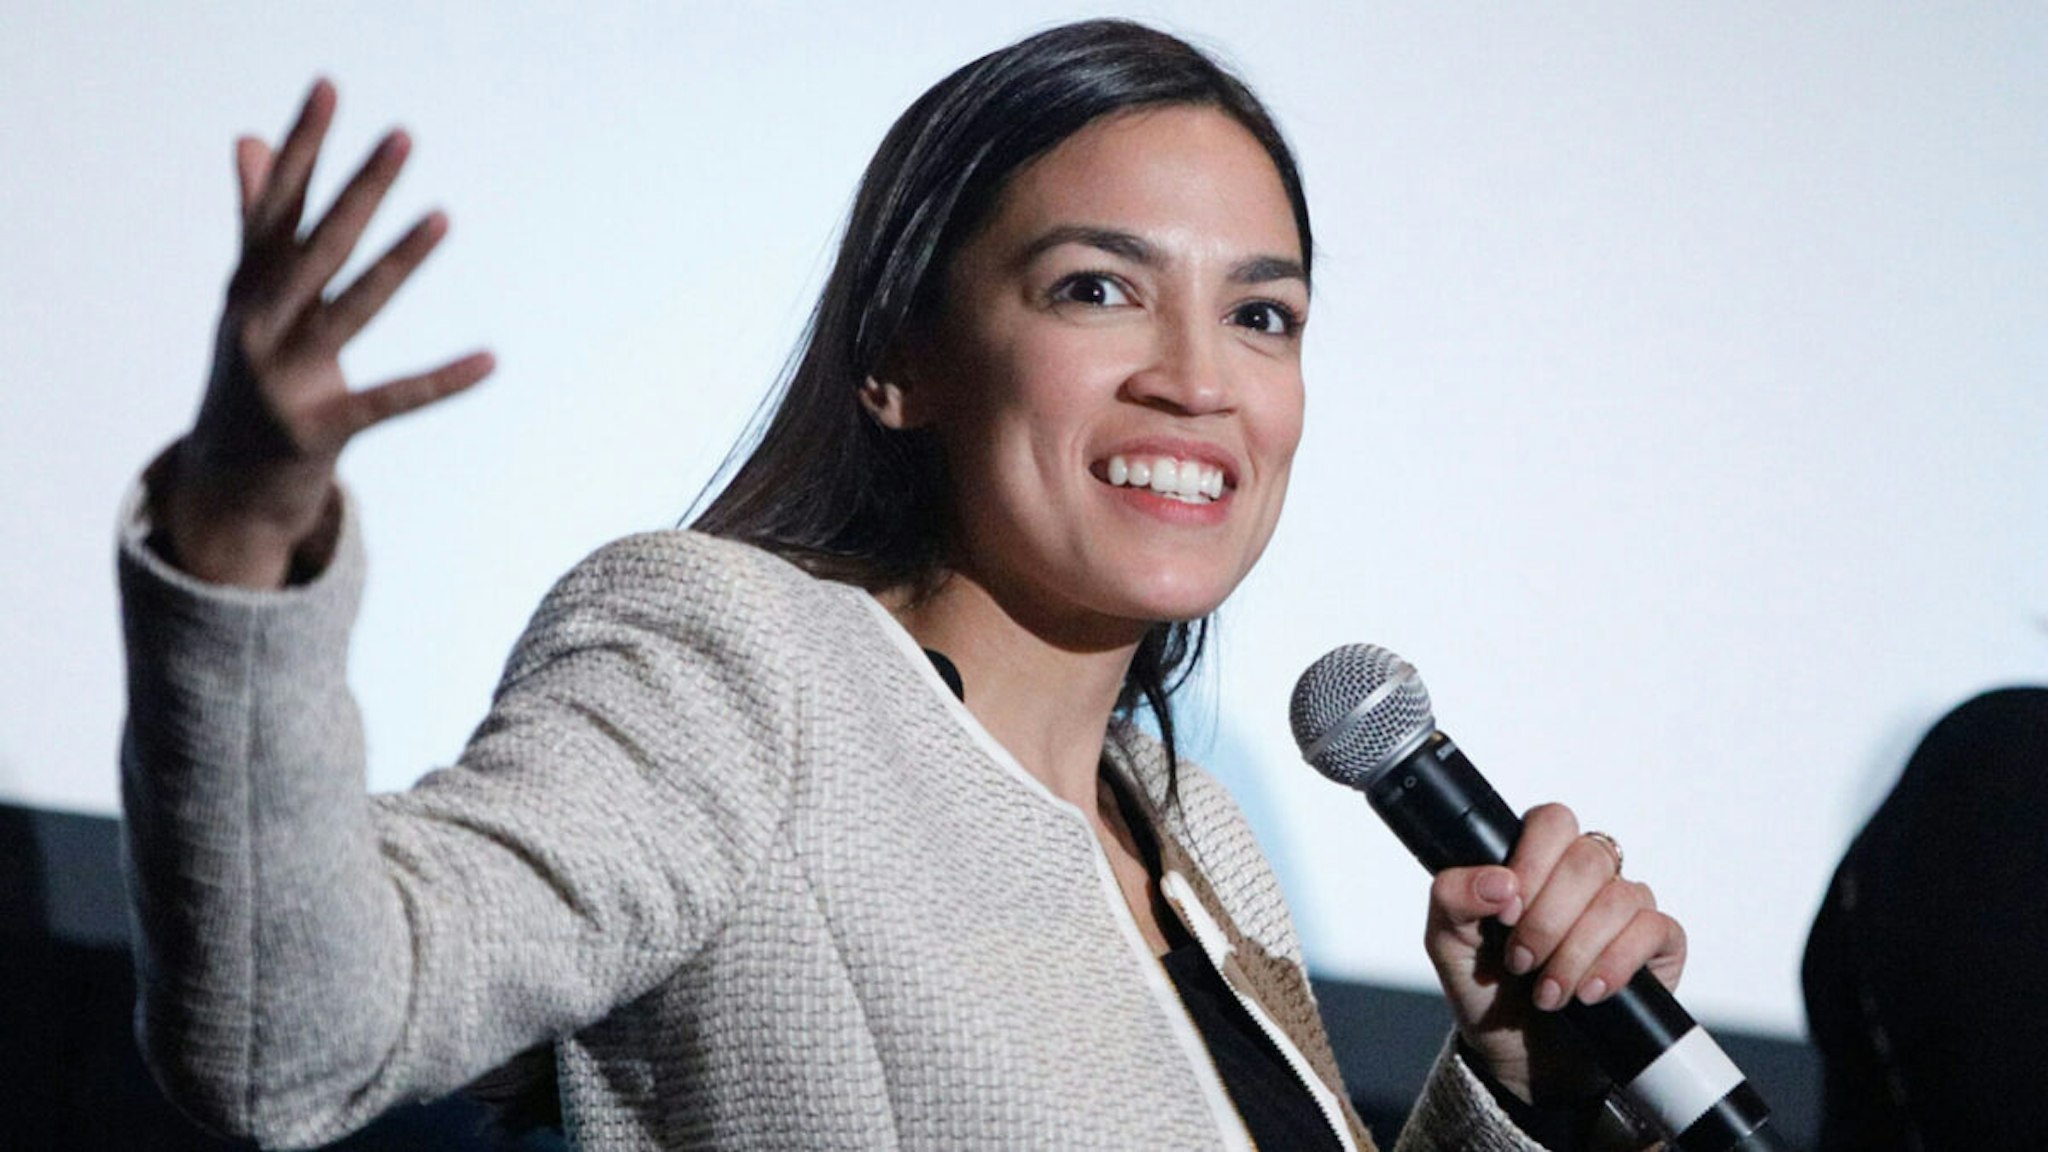 US Representative Alexandria Ocasio-Cortez on stage during the 2019 Athena Film Festival closing night film, "Knock Down the House" at the Diana Center at Barnard College on March 3, 2019 in New York City.